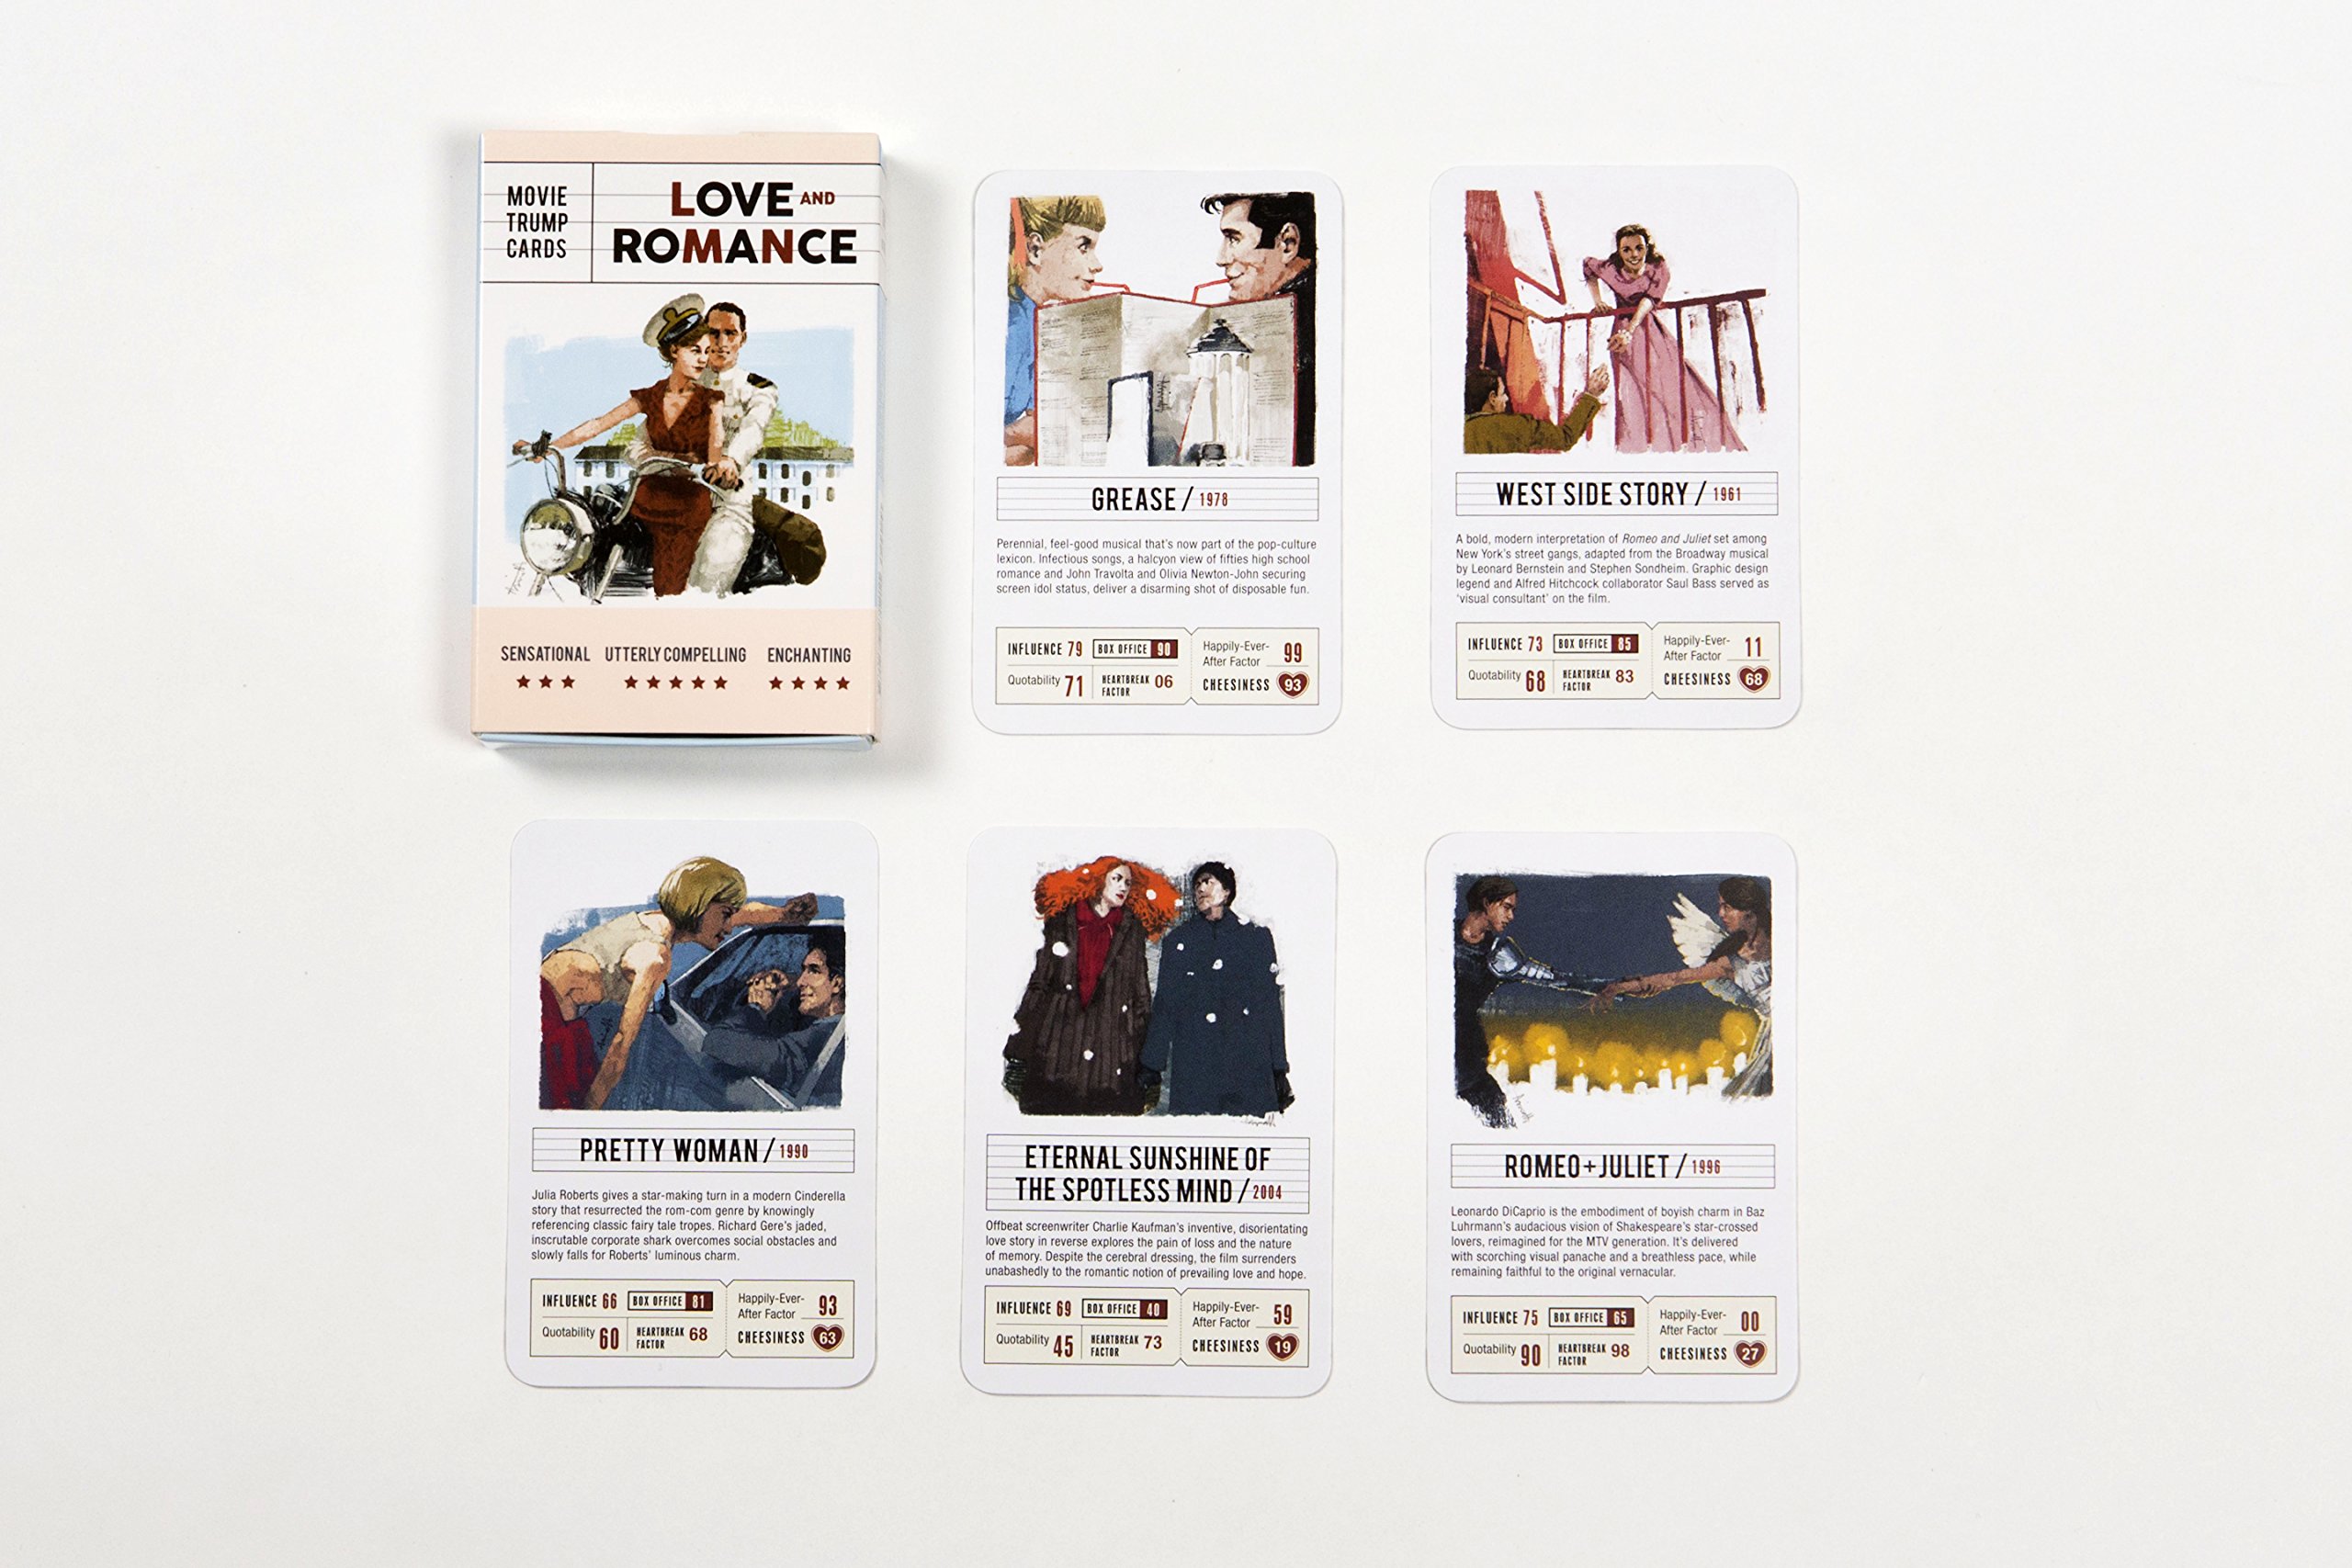 Love and Romance - Movie Trump Cards | Laurence King Publishing image2